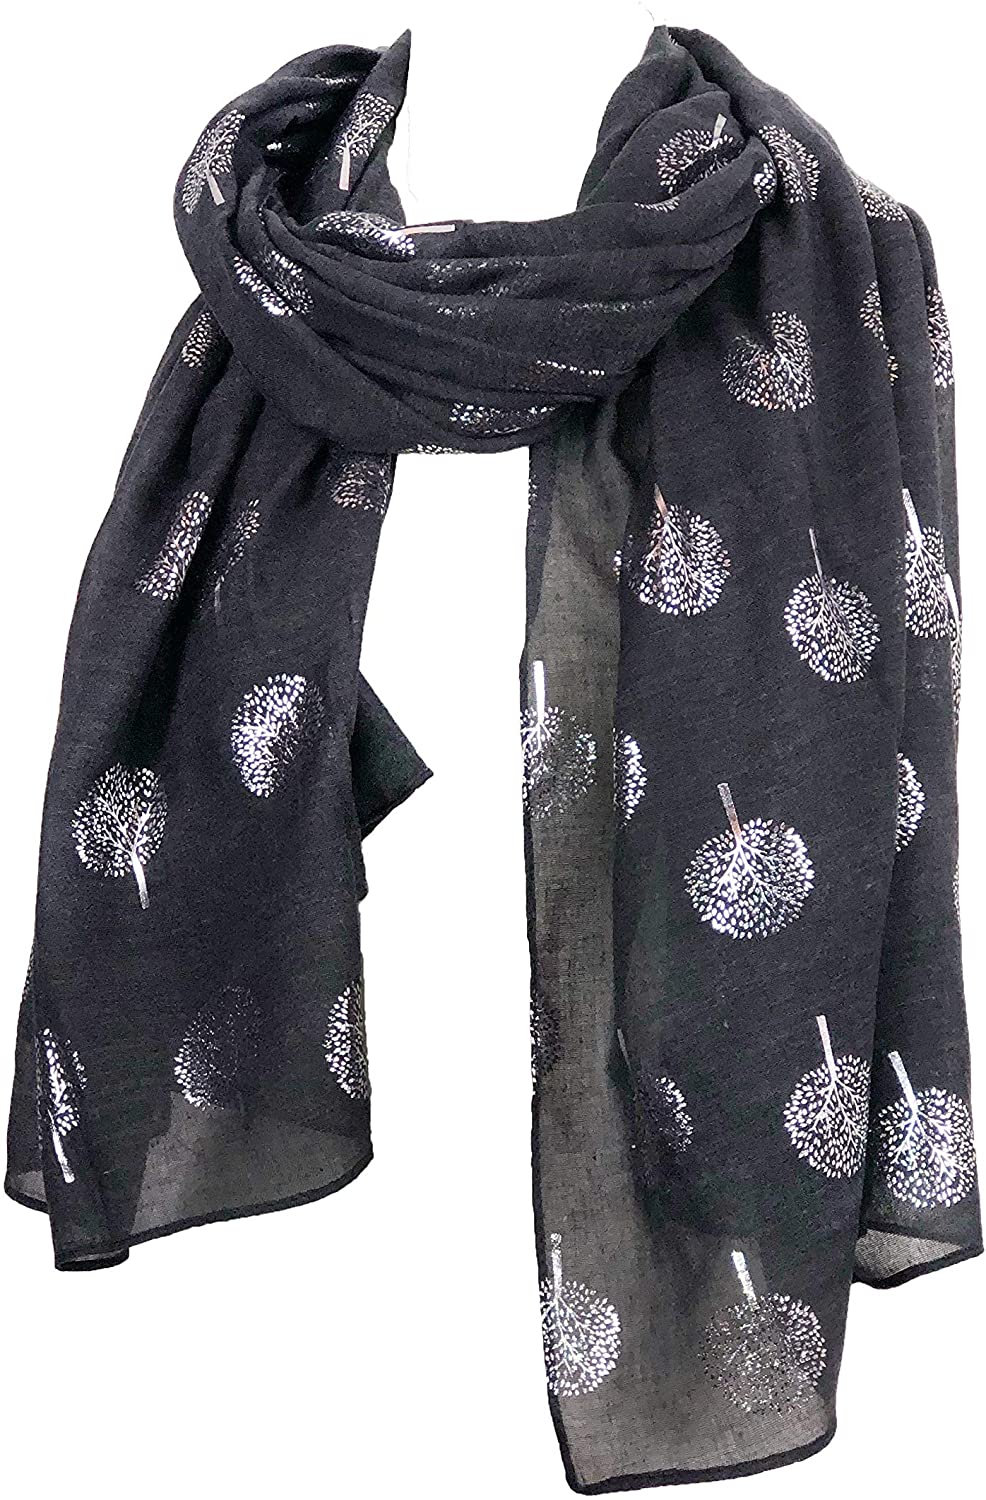 Pamper Yourself Now Dark Grey with Silver Foiled Mulberry Tree Design Ladies Scarf/wrap. Great Present for Mum, Sister, Girlfriend or Wife.